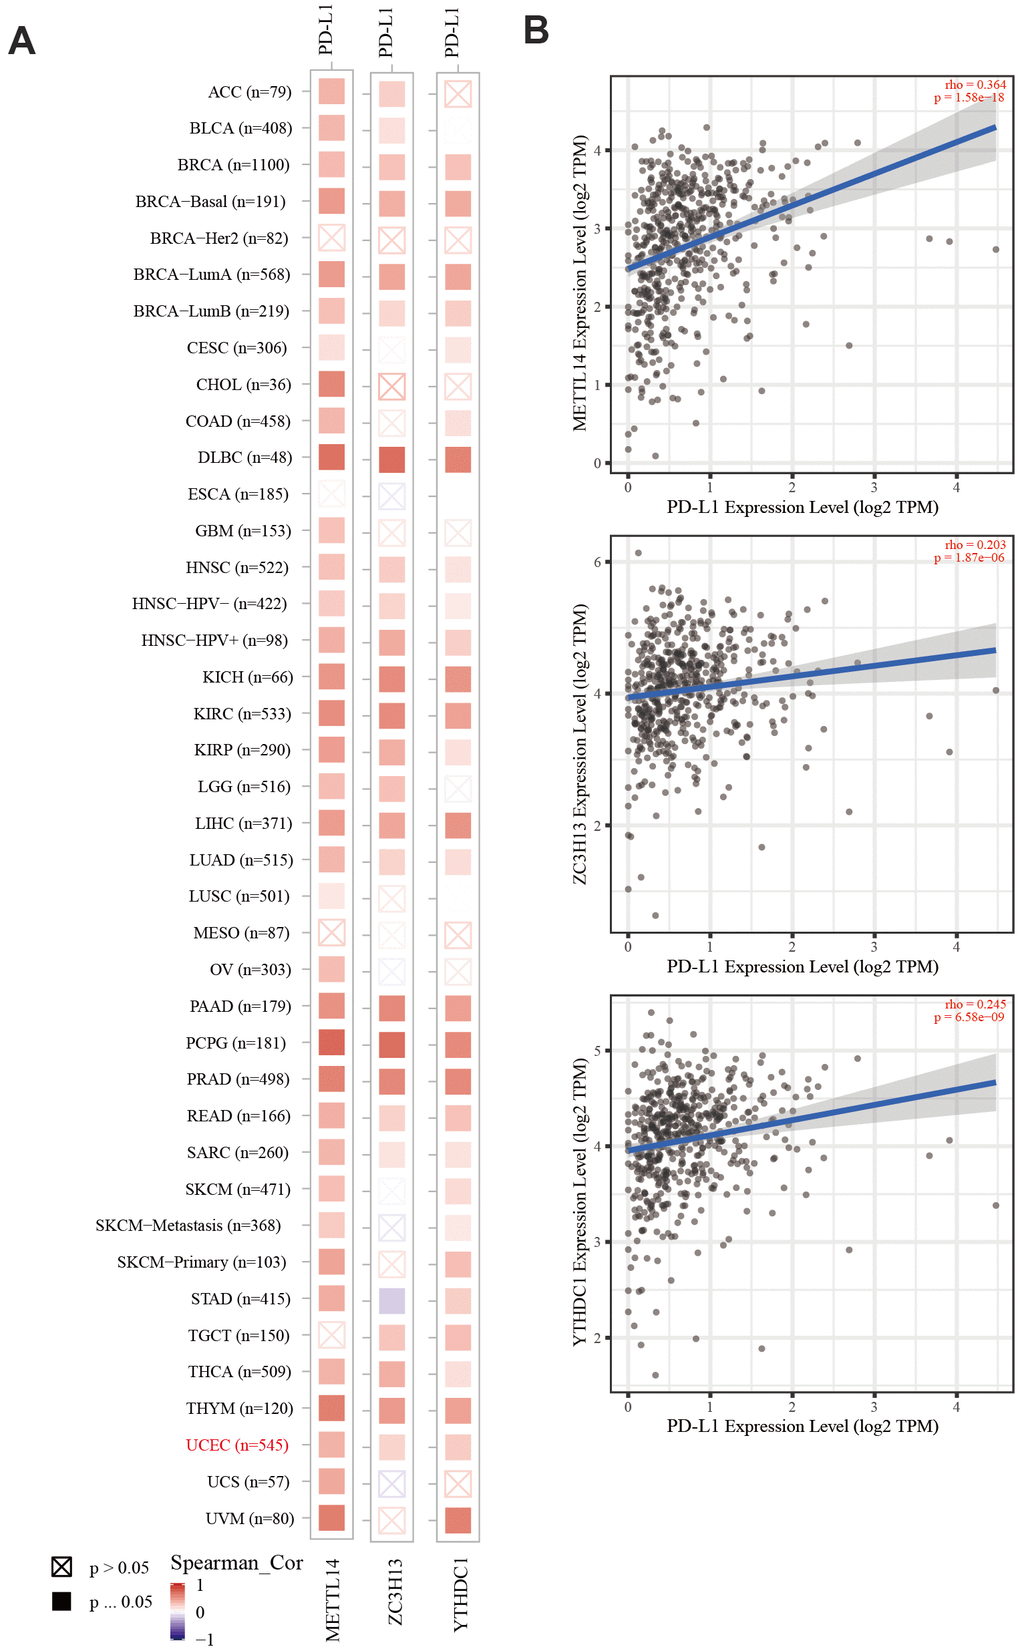 The correlation of METTL14, ZC3H13, and YTHDC1 expression with PD-L1. (A) Heatmap depicting the correlation of METTL14, ZC3H13, and YTHDC1 expression with PD-L1 in diverse cancer types. (B) Spearman’s correlation analysis was employed.